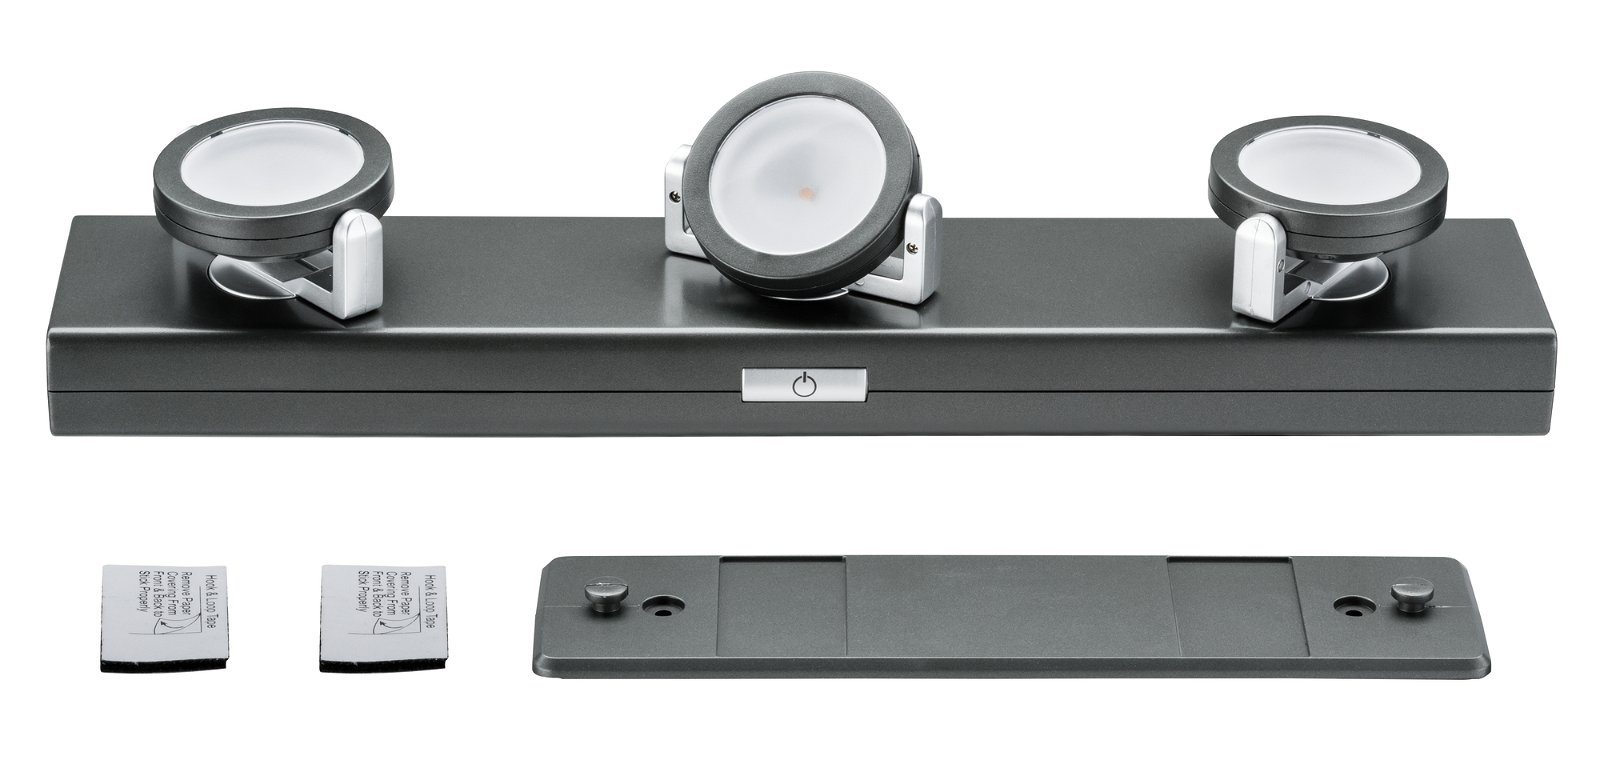 LED Under-cabinet luminaire Batterie Rotate incl. switch 310x60mm 3x18lm 3000K dimmable Anthracite/Chrome matt